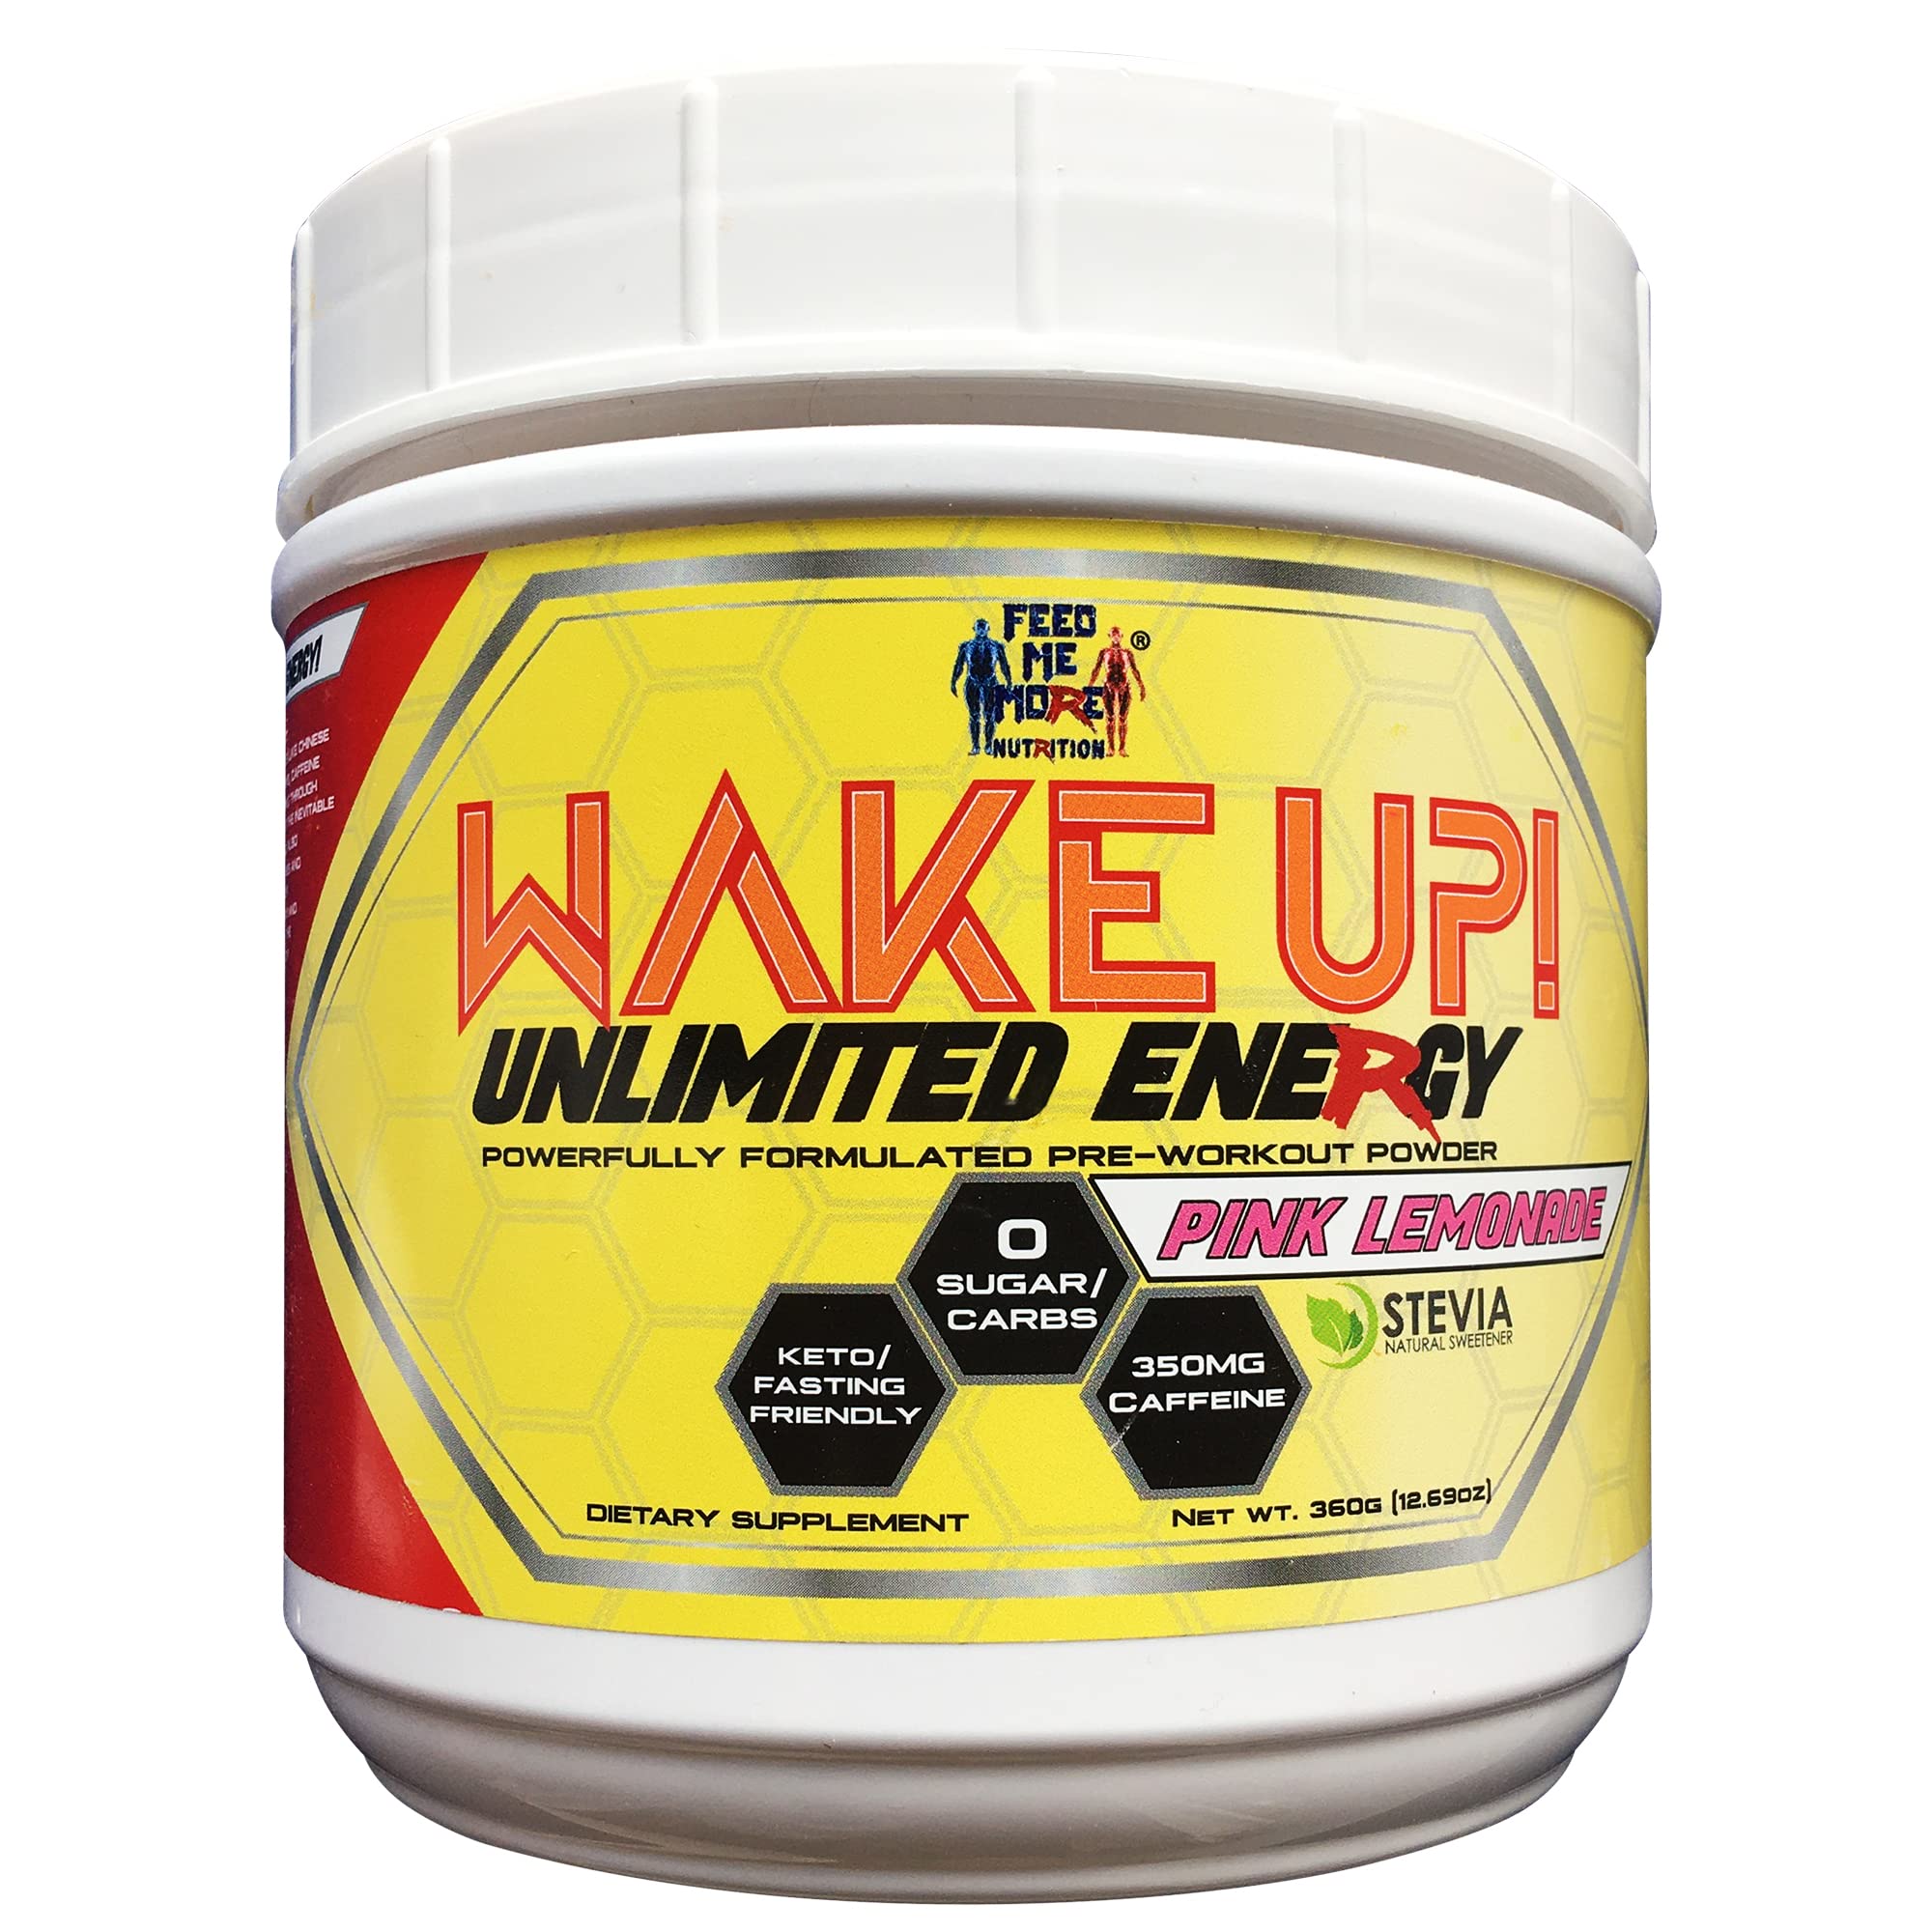 Wake UP Unlimited Energy Stevia 0 Calorie Pre Workout Powder Supplement Drink - #1 Energy Powder,Non GMO, All Natural Gluten Free Fasting/Keto Frie...